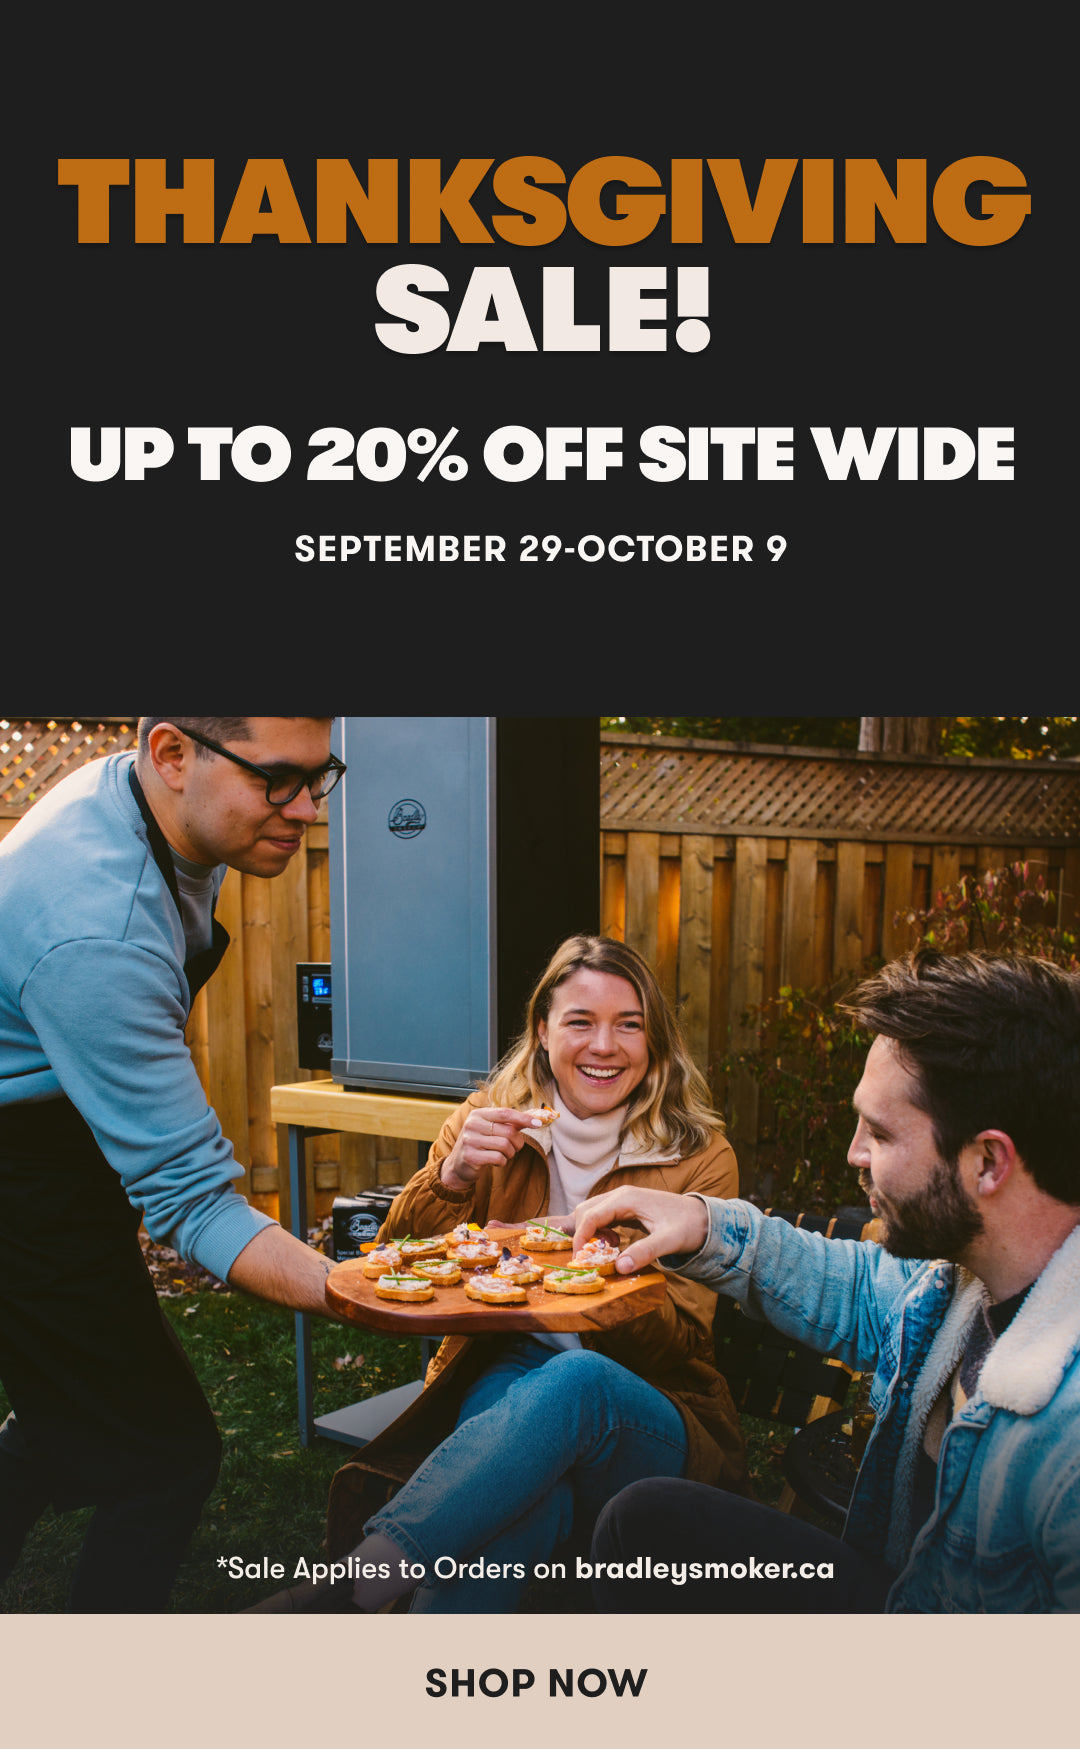 Thanksgiving sale!
Up to 20% off site-wide
September 29-October 9
Shop Now
*Sale applies to orders on bradleysmoker.ca